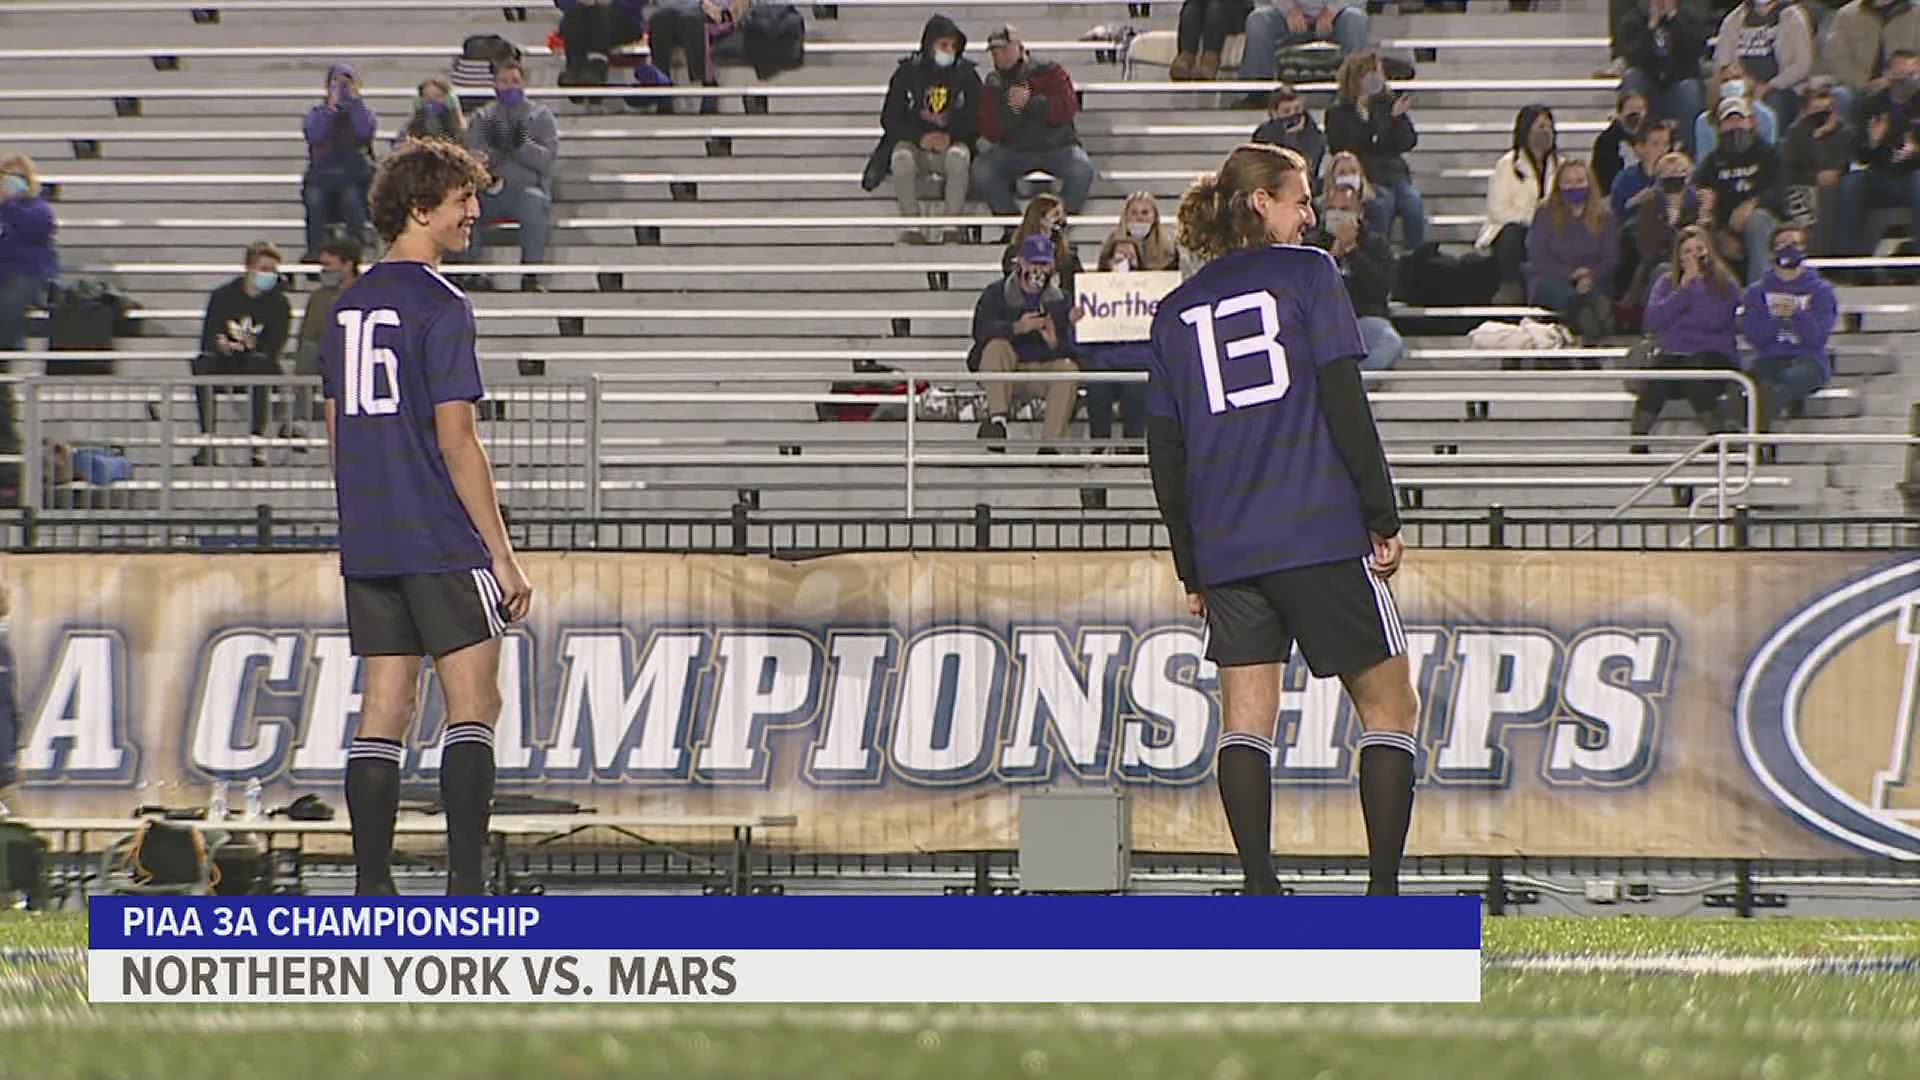 The Polar Bears were the first on the board, but a pair of Fightin' Planet goals in the second lifts Mars to the state title.